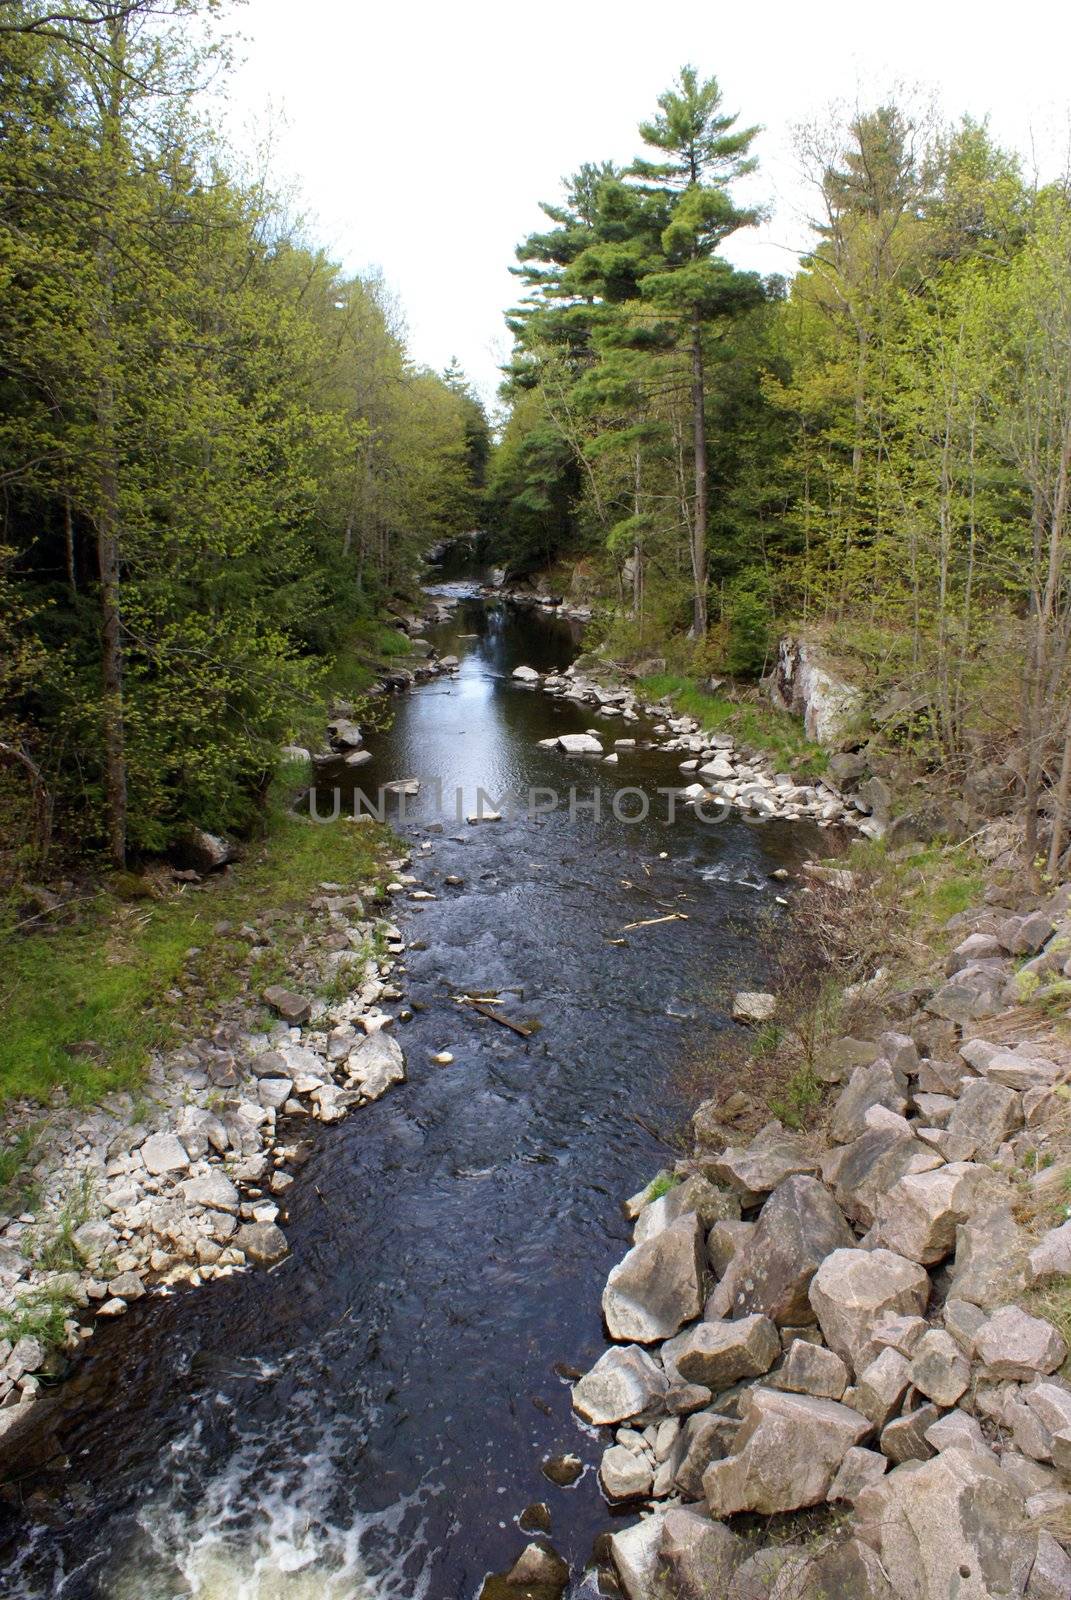 A shot of the fresh outdoors of a calm creek running through the forest.